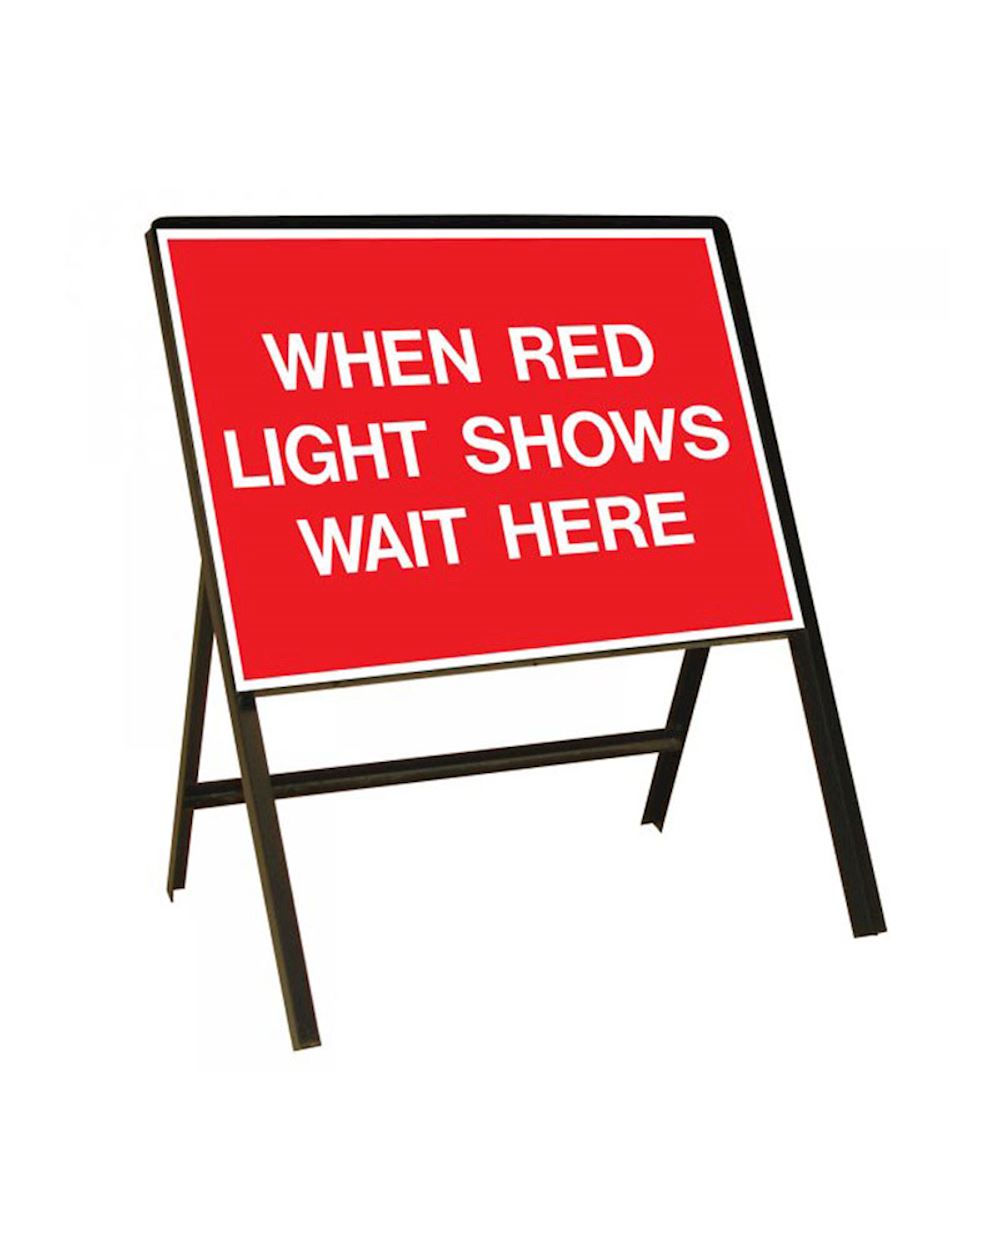 When red light shows wait here Safety Site Road Sign metal 